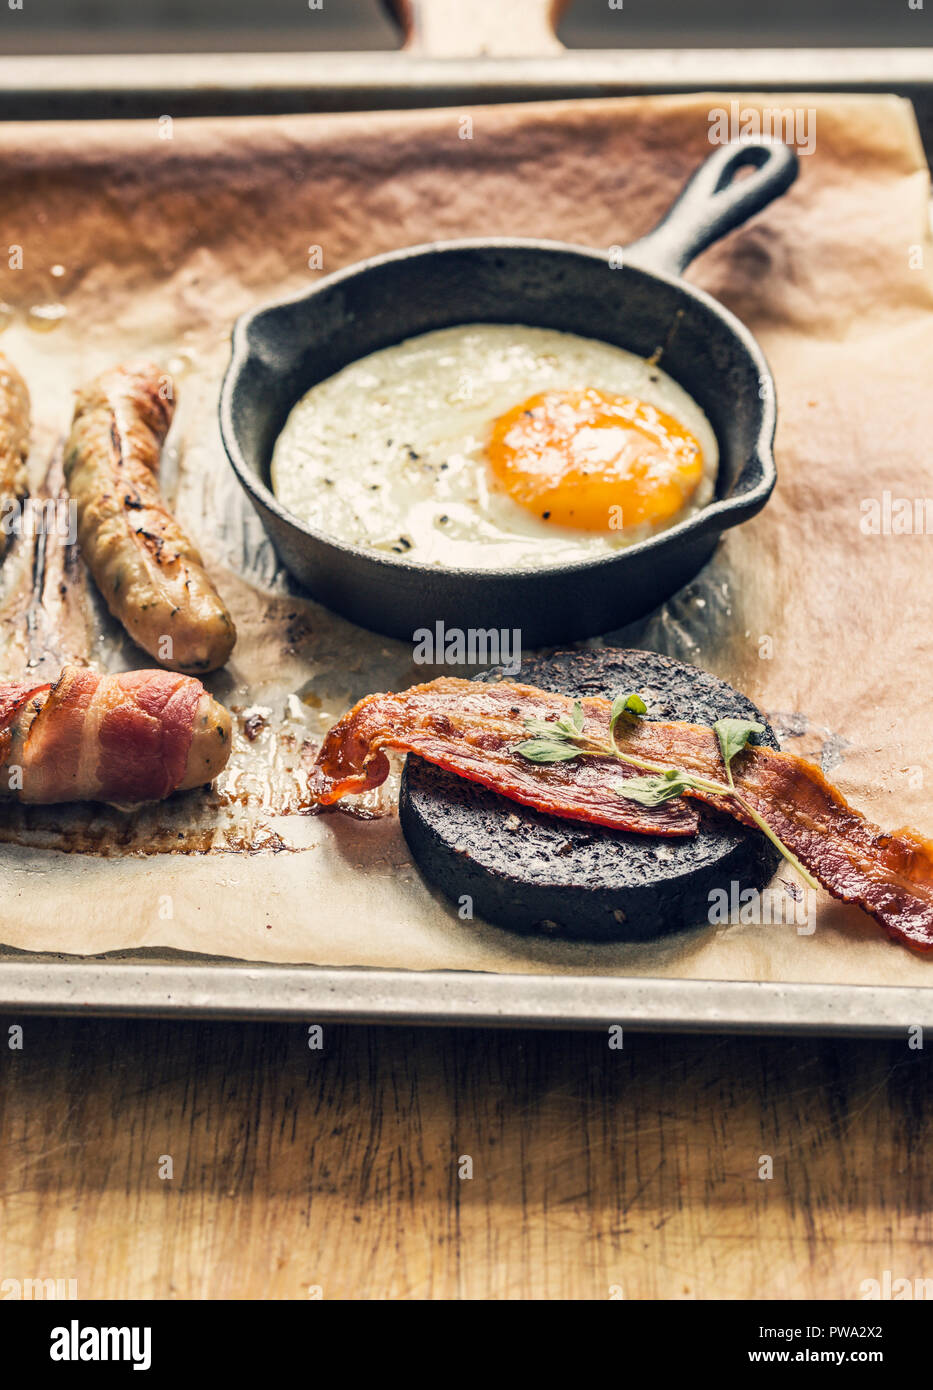 Fry up breakfast tray with egg, black pudding, bacon and chipolata sausages Stock Photo